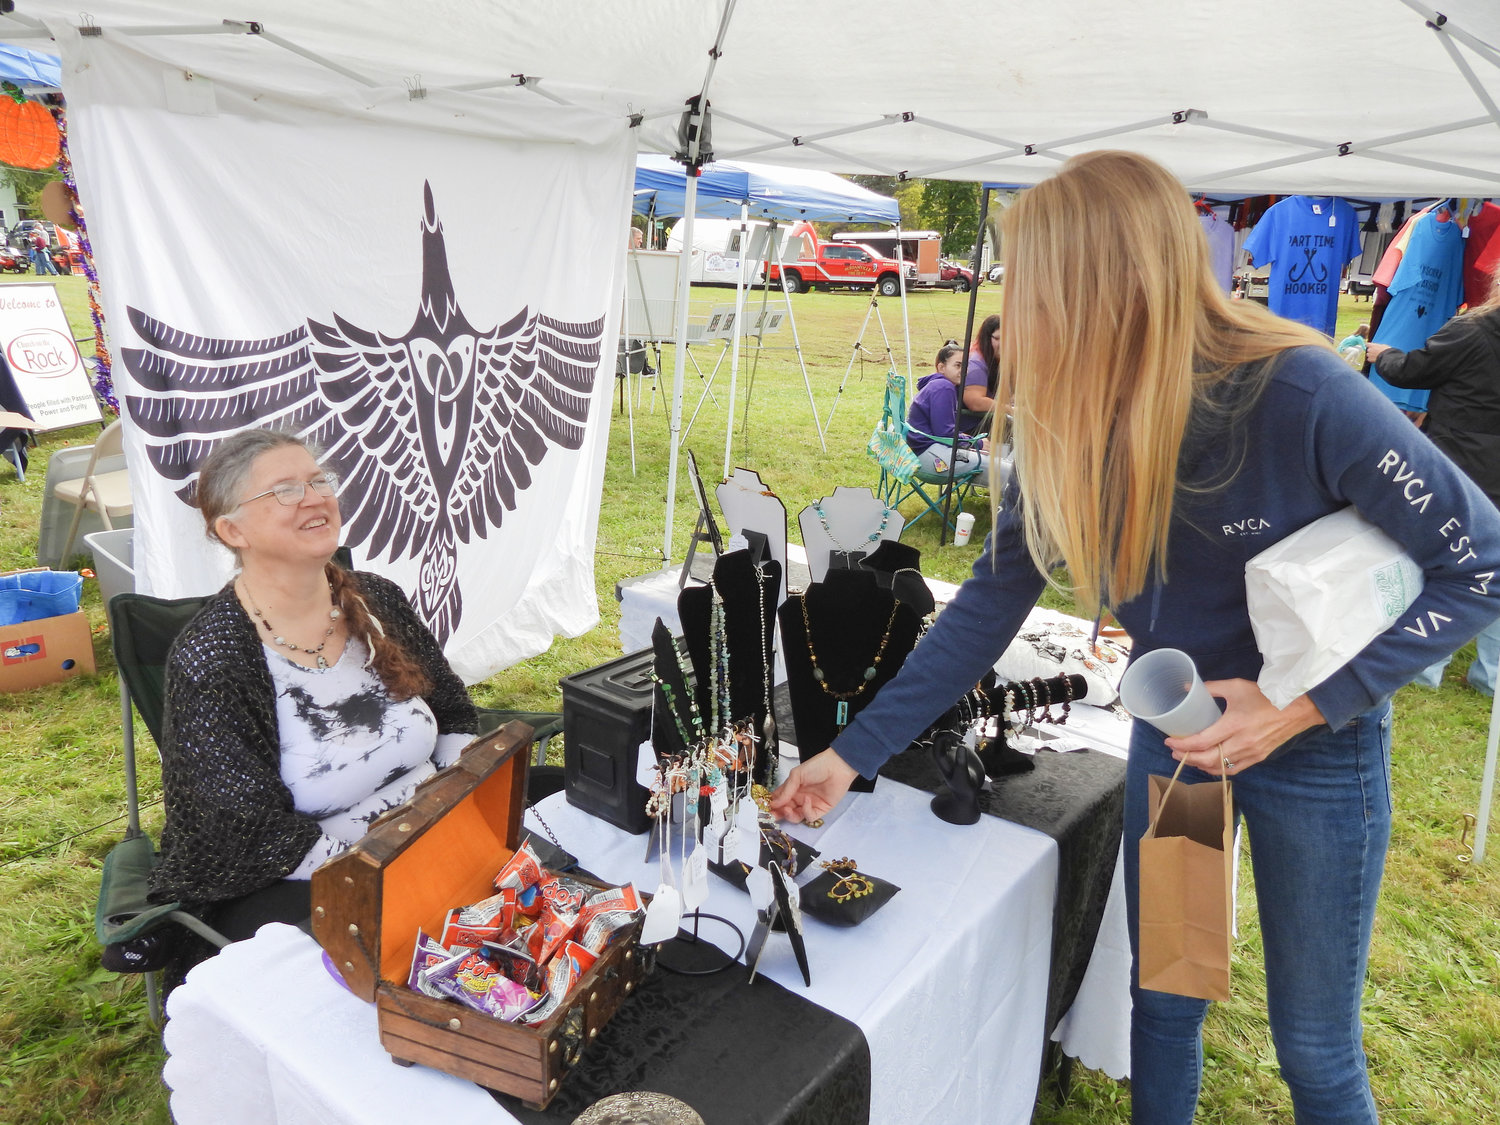 Lisa Fish, left, a resident of Oneida and owner of Magpie Mercantile, sells her handmade jewelry at the second annual Oneida Fall Fest on Saturday, Oct. 1.